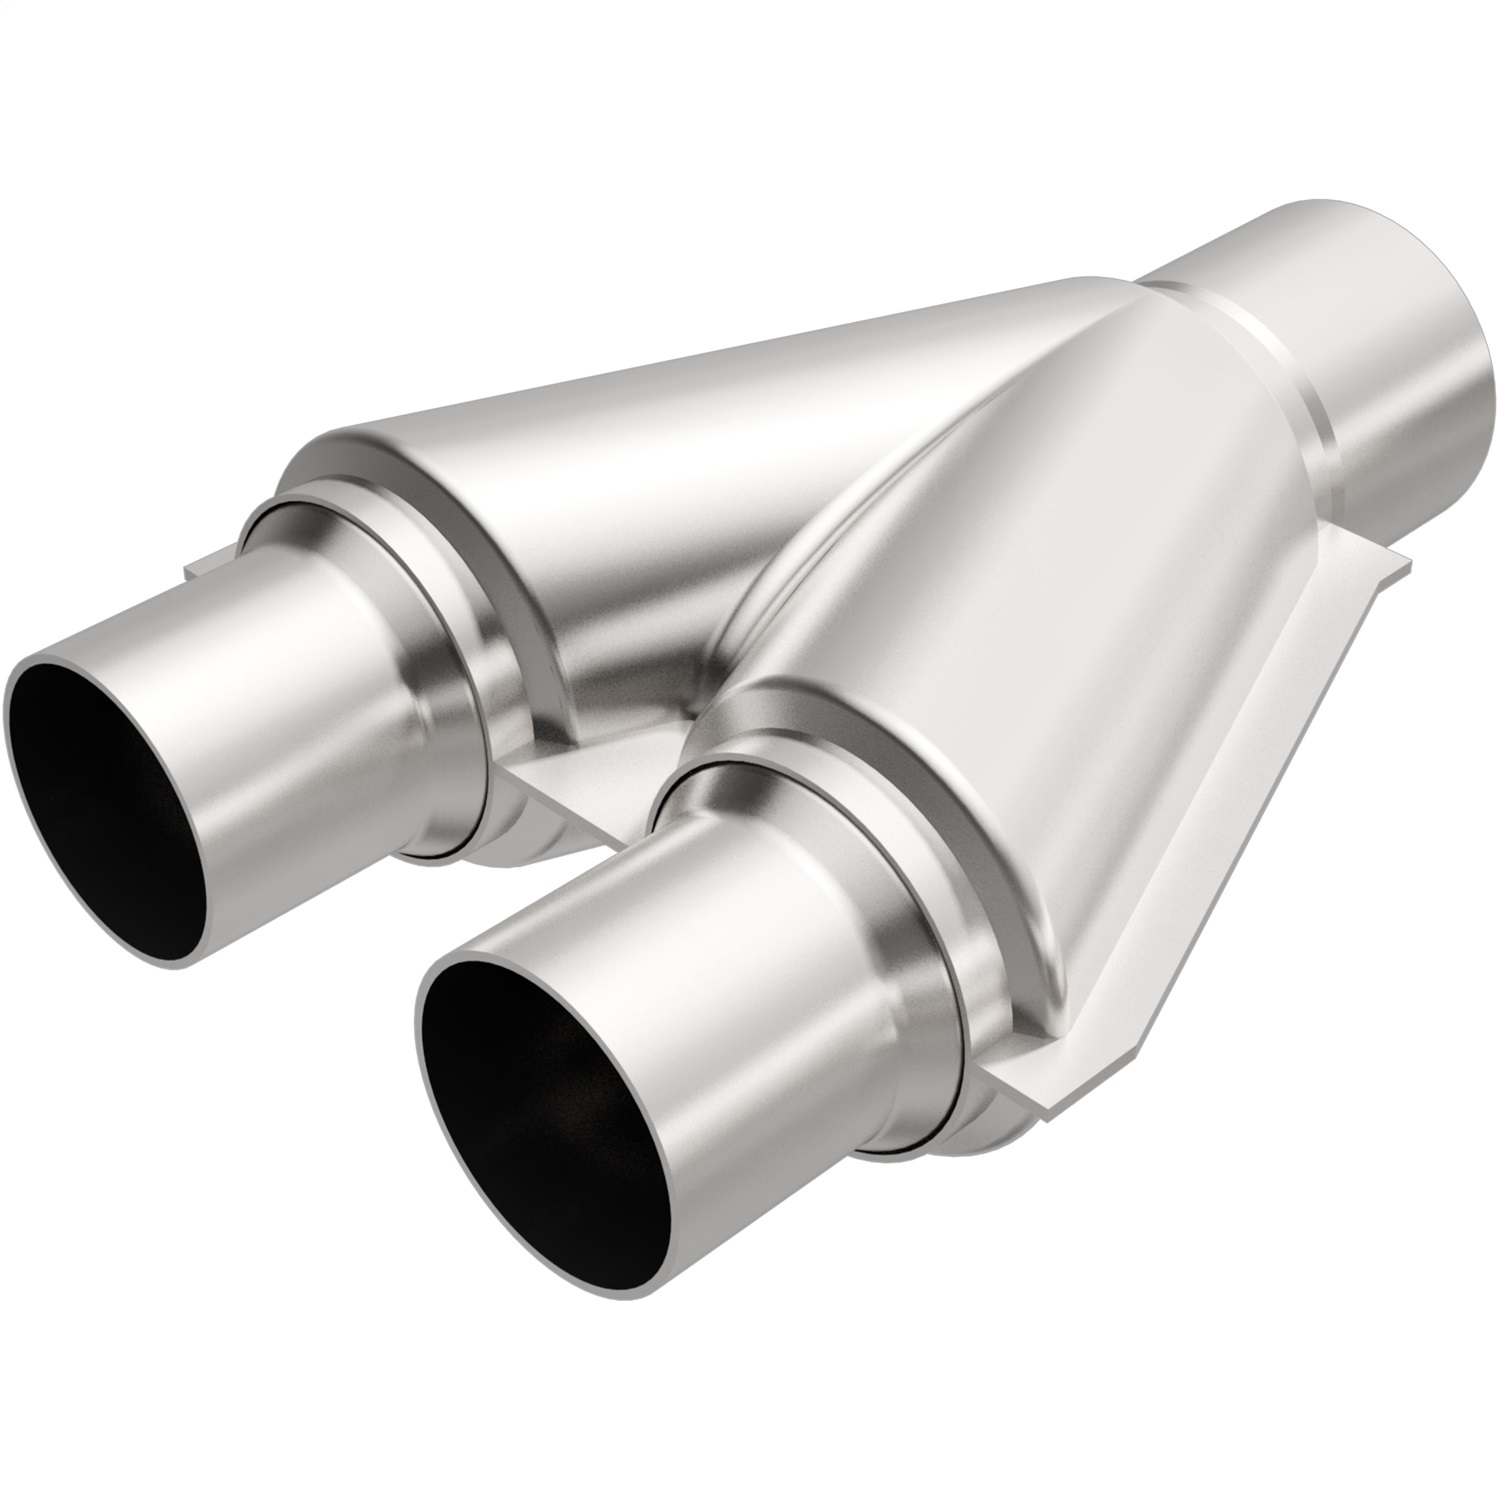 Magnaflow Performance Exhaust Magnaflow Performance Exhaust 10798 Stainless Steel Y-Pipe